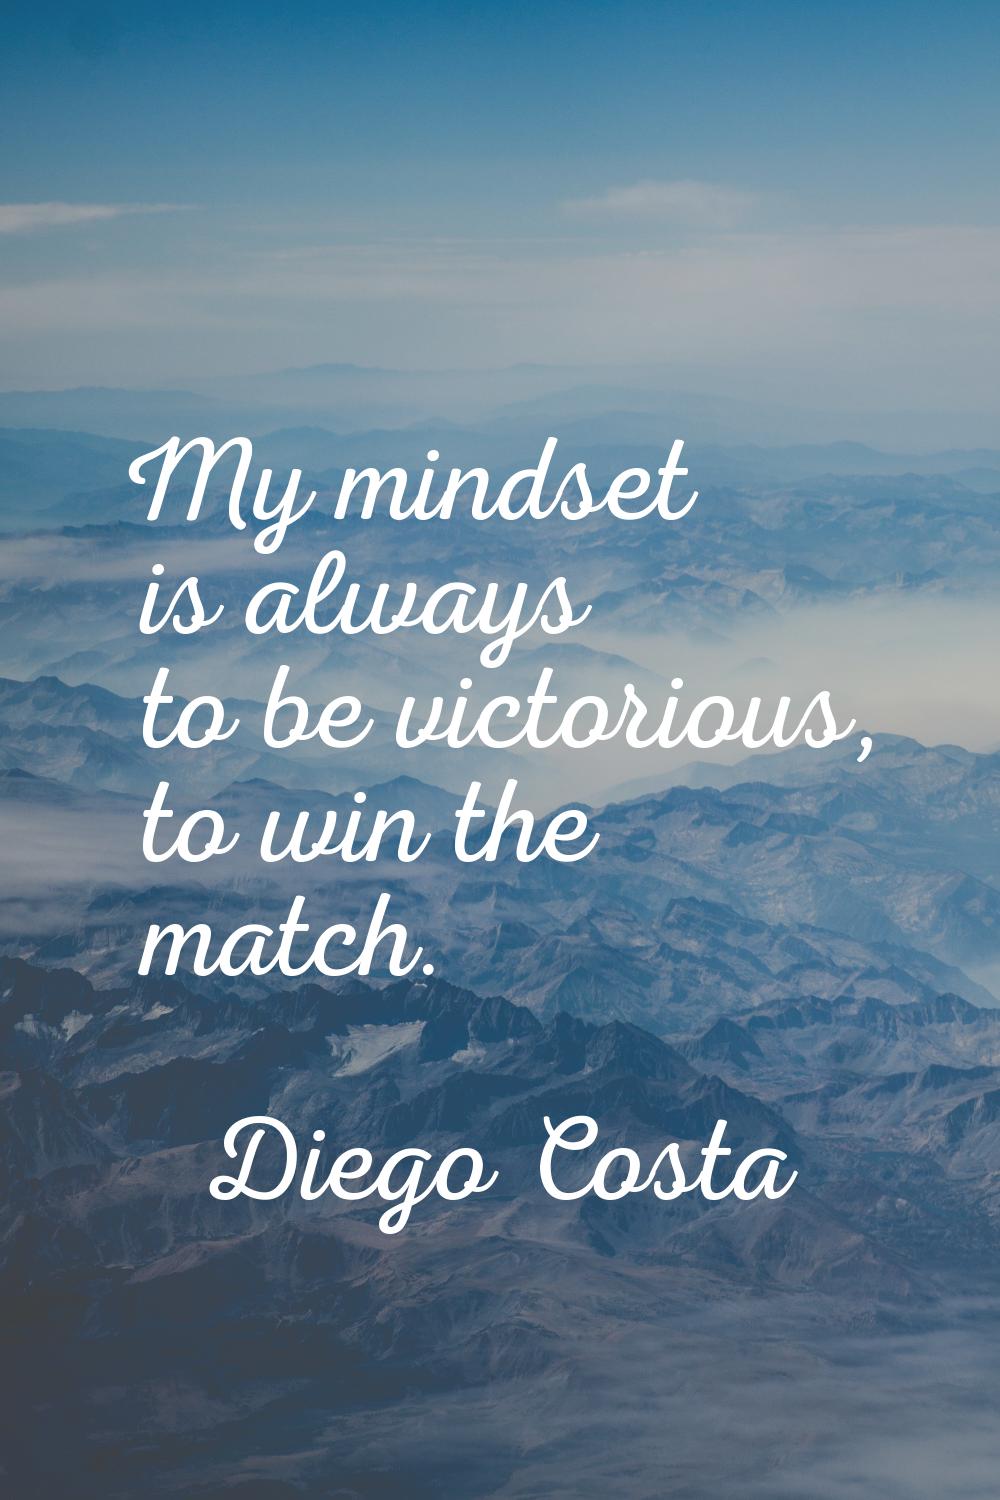 My mindset is always to be victorious, to win the match.